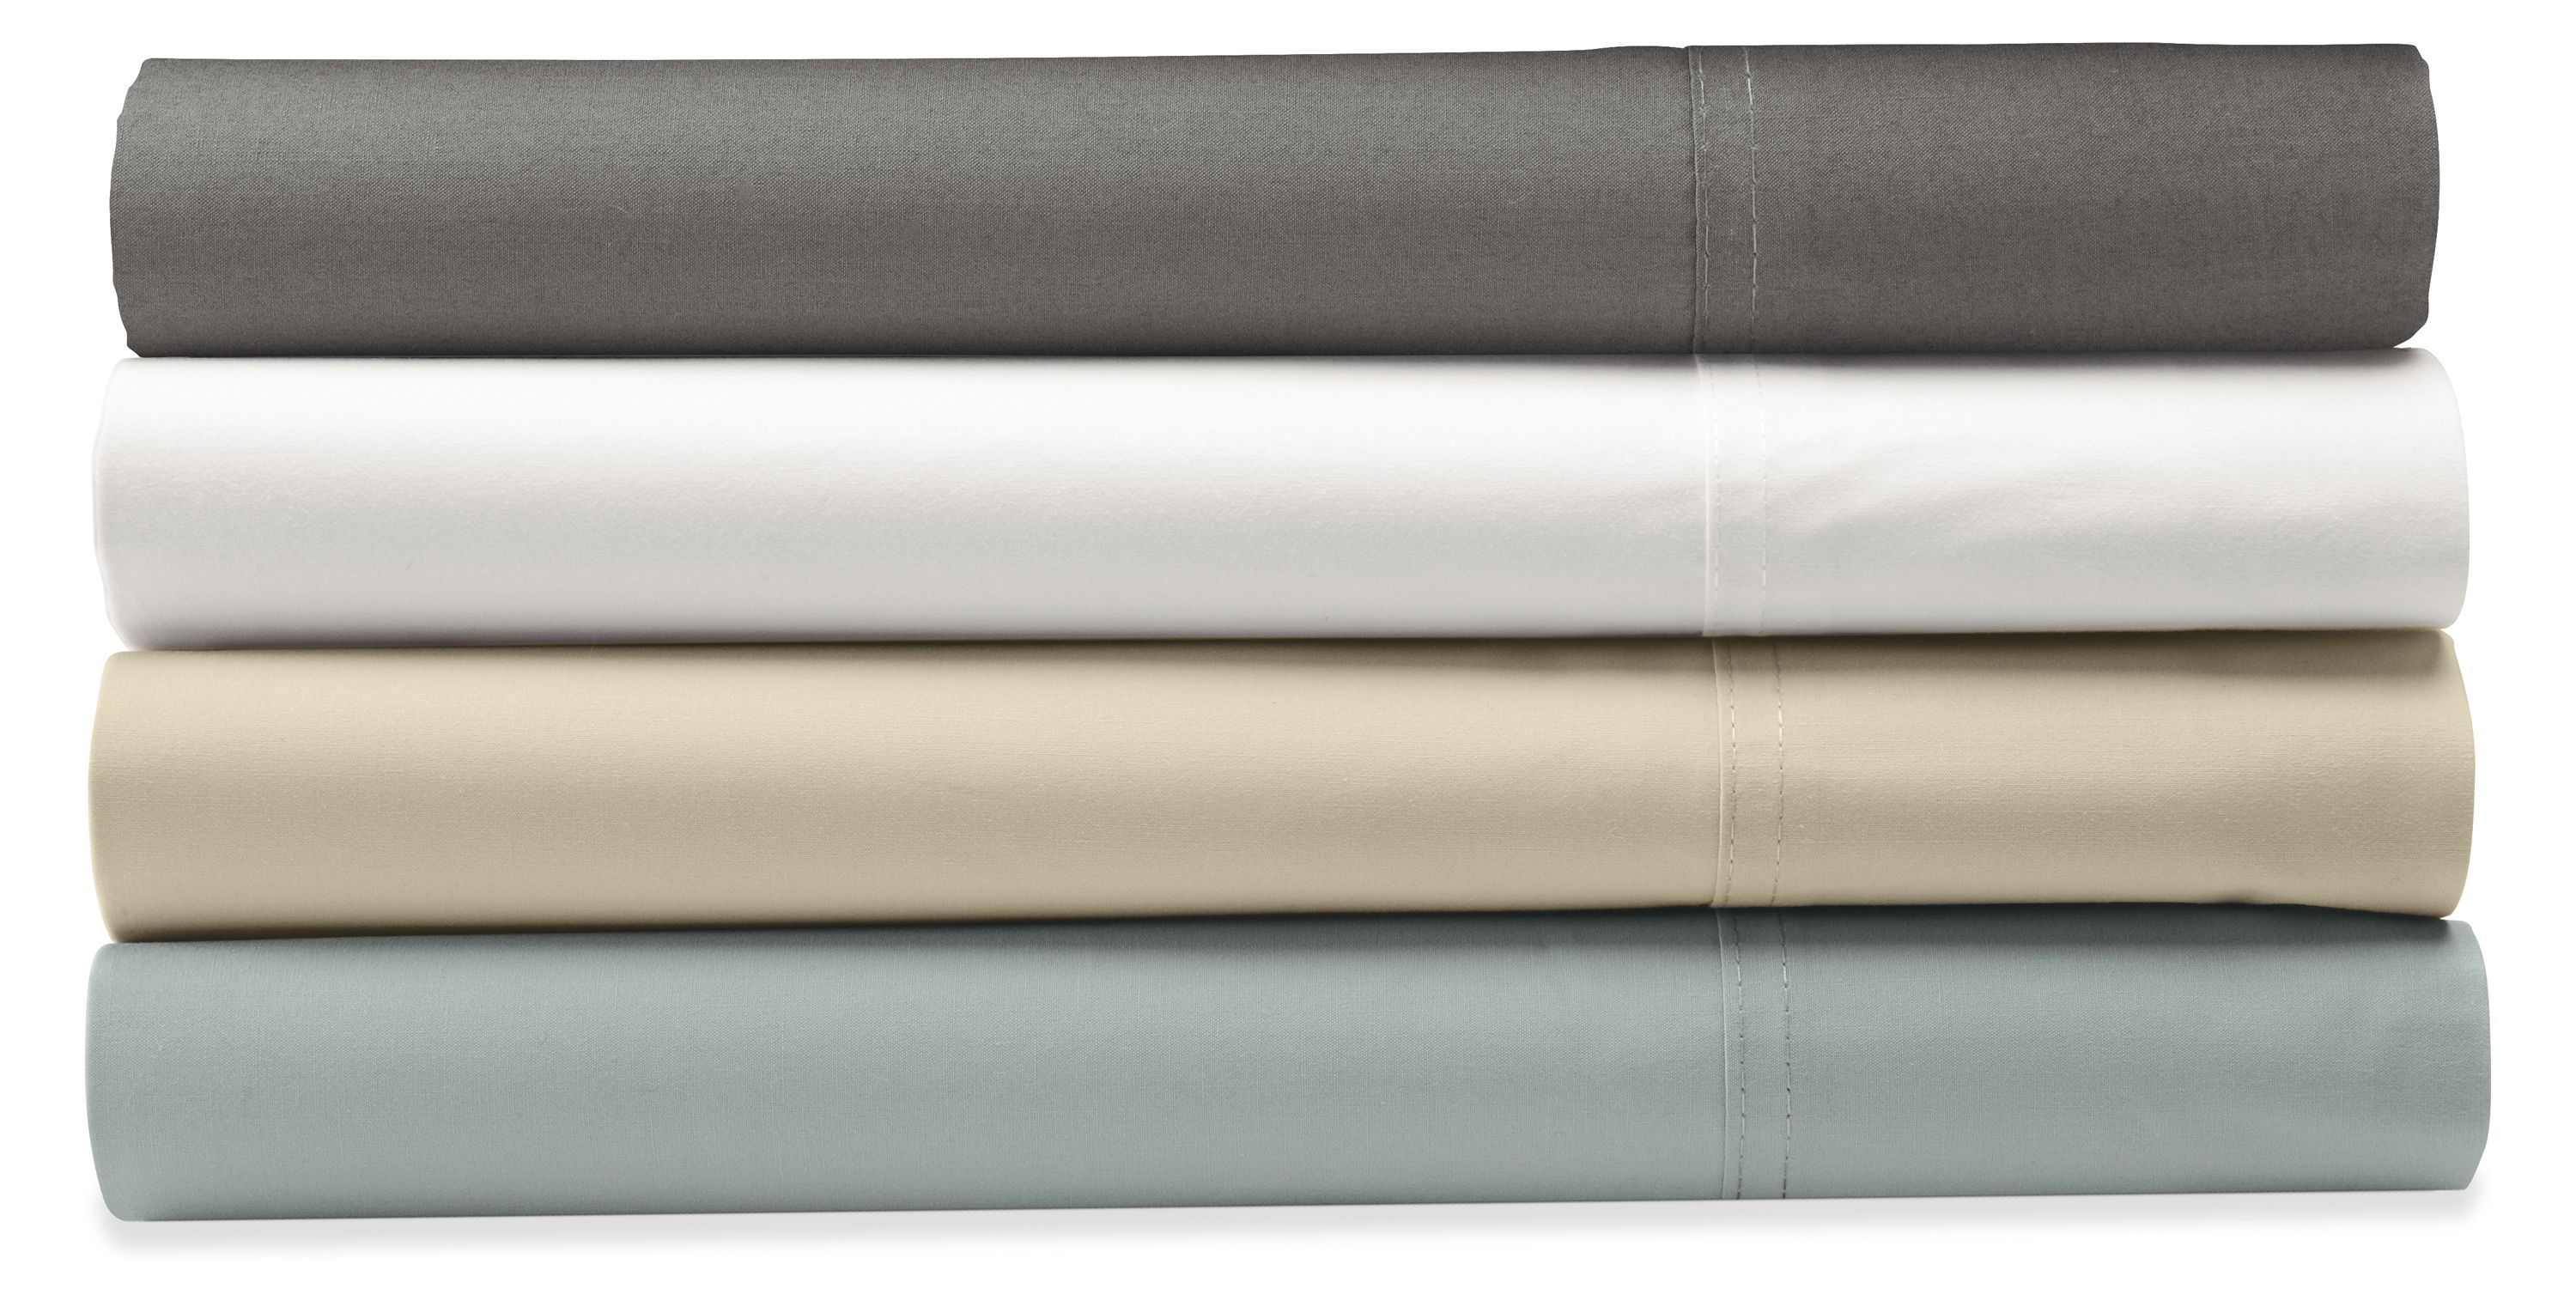 Percale Sheets & Pillowcases - Sheets & Pillowcases - Accessories ...